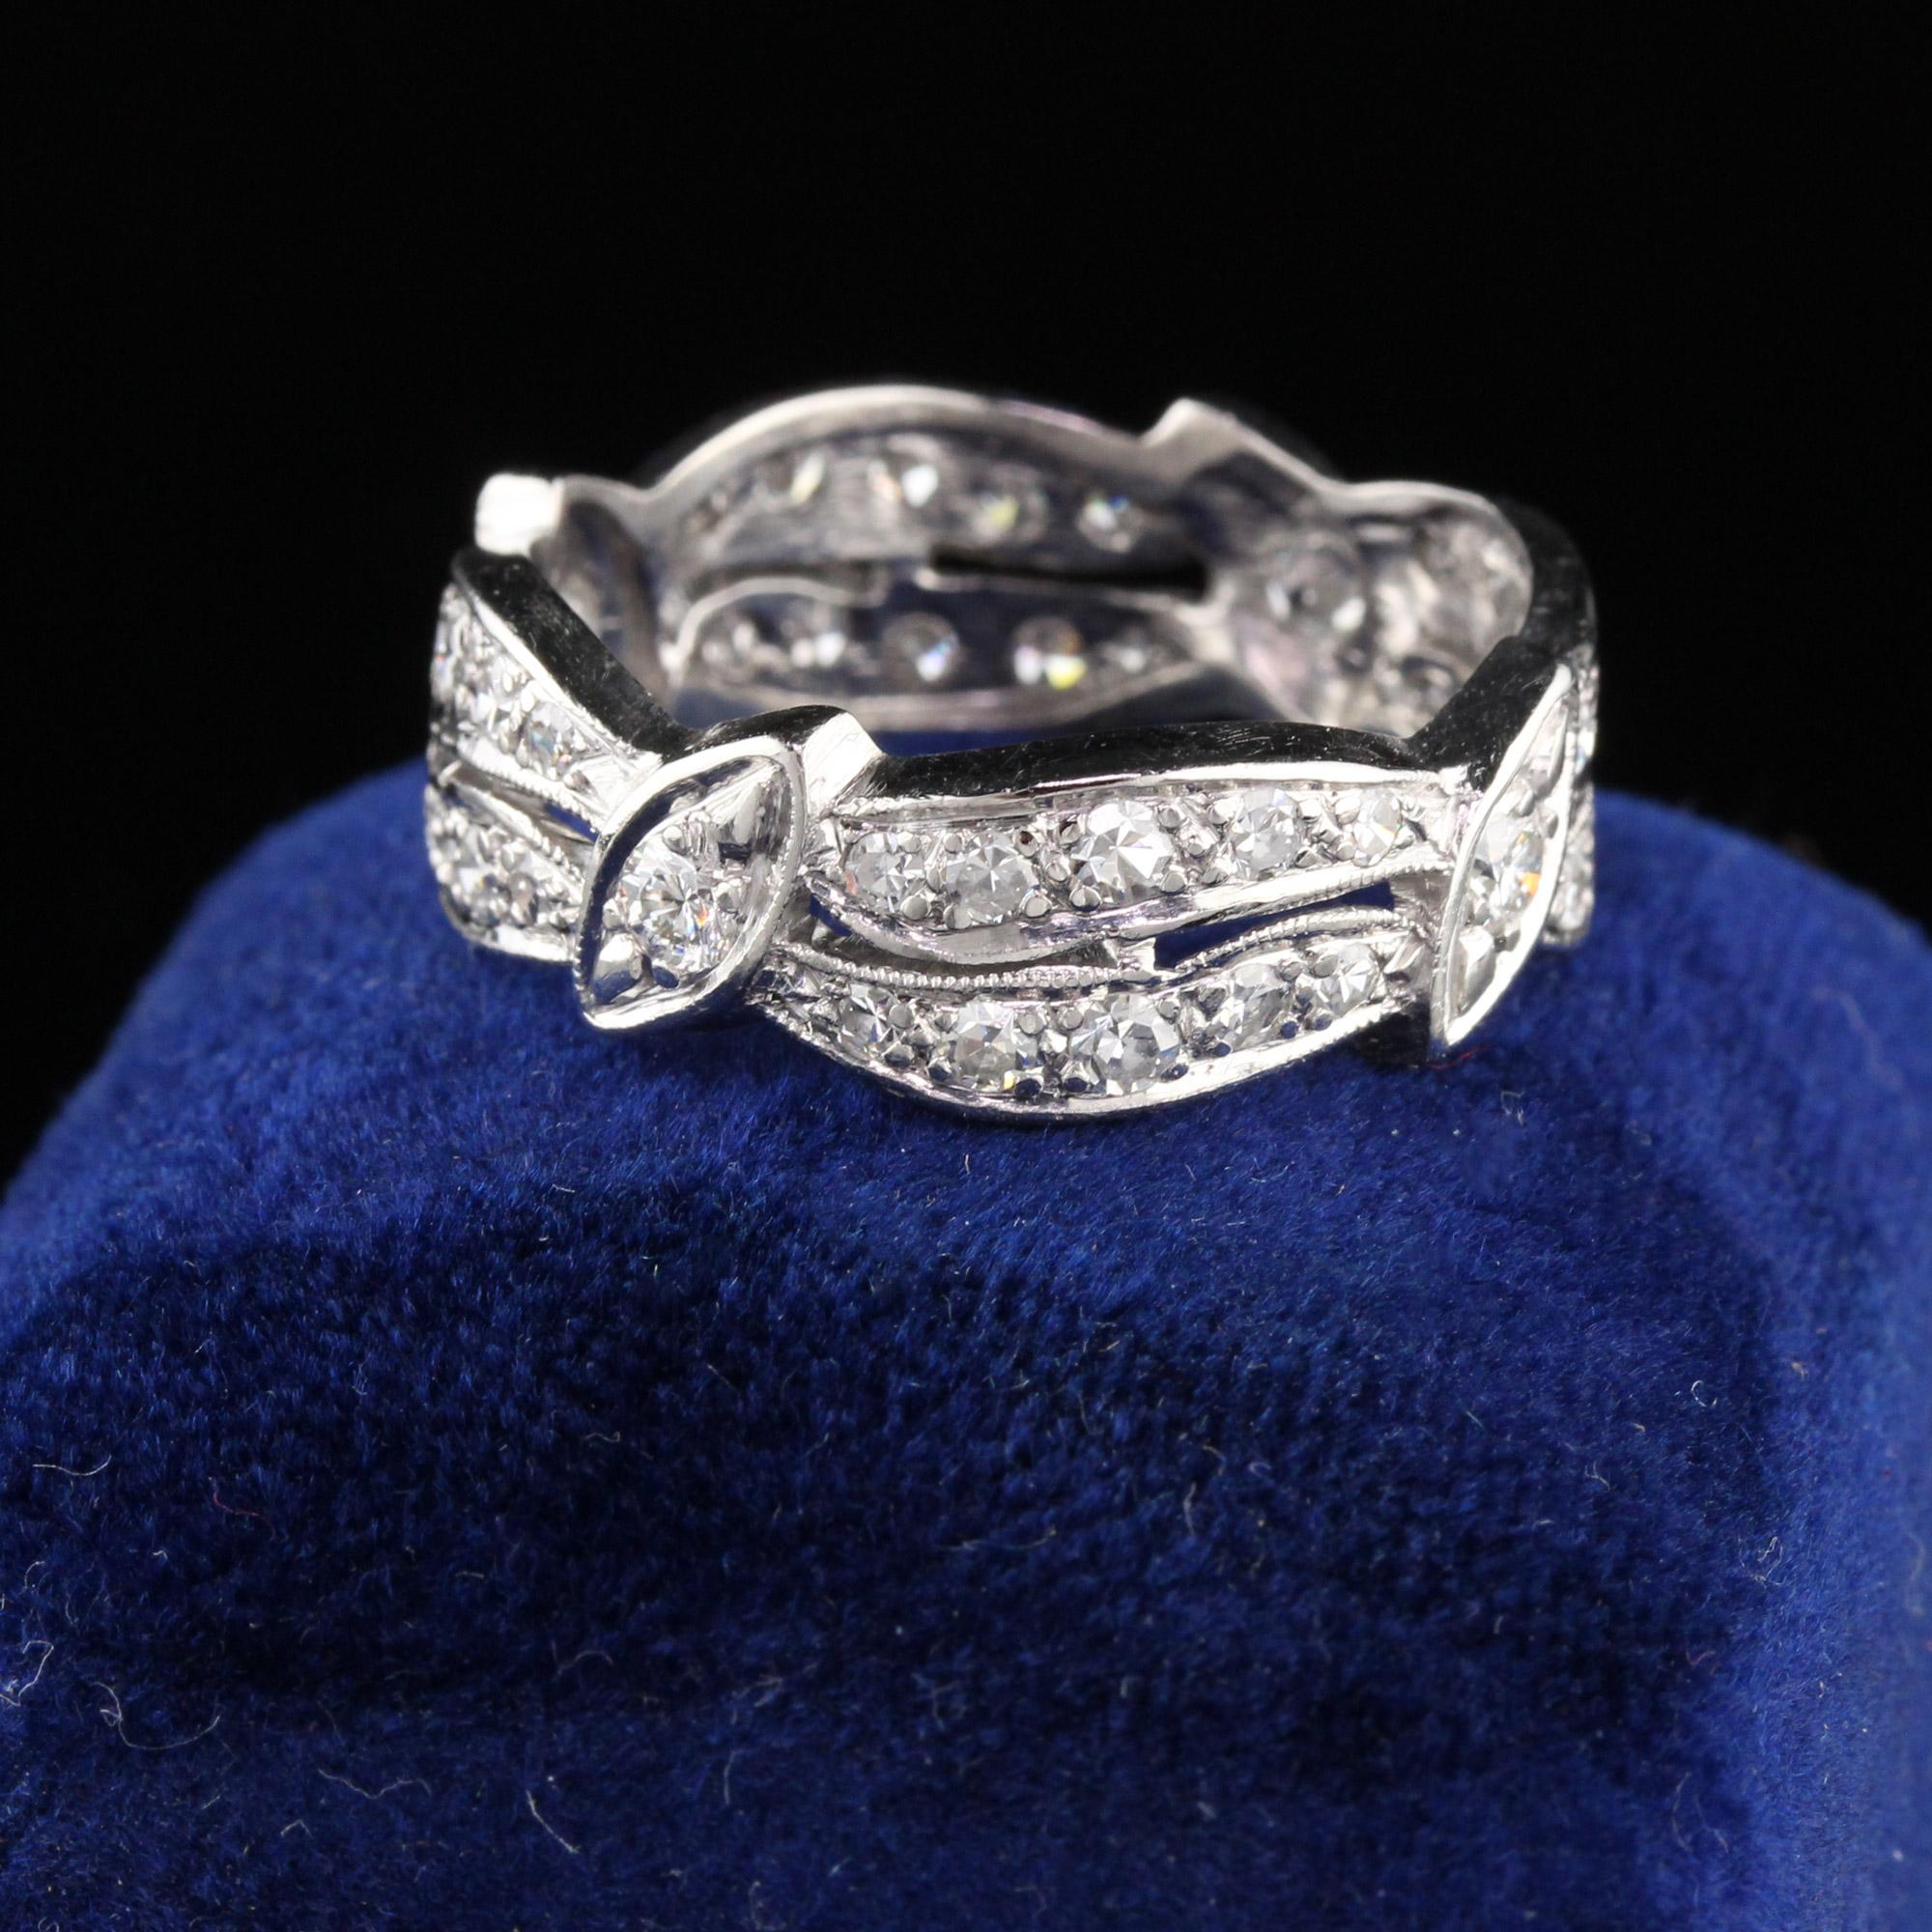 Beautiful Retro Eternity Band with a very unique design of waves and marquise shapes. The single cut diamonds sparkle beautifully!

#R0297

Metal: Platinum

Weight: 6.4 Grams

Total Diamond Weight: Approximately 0.80 cts single cut diamonds

Diamond